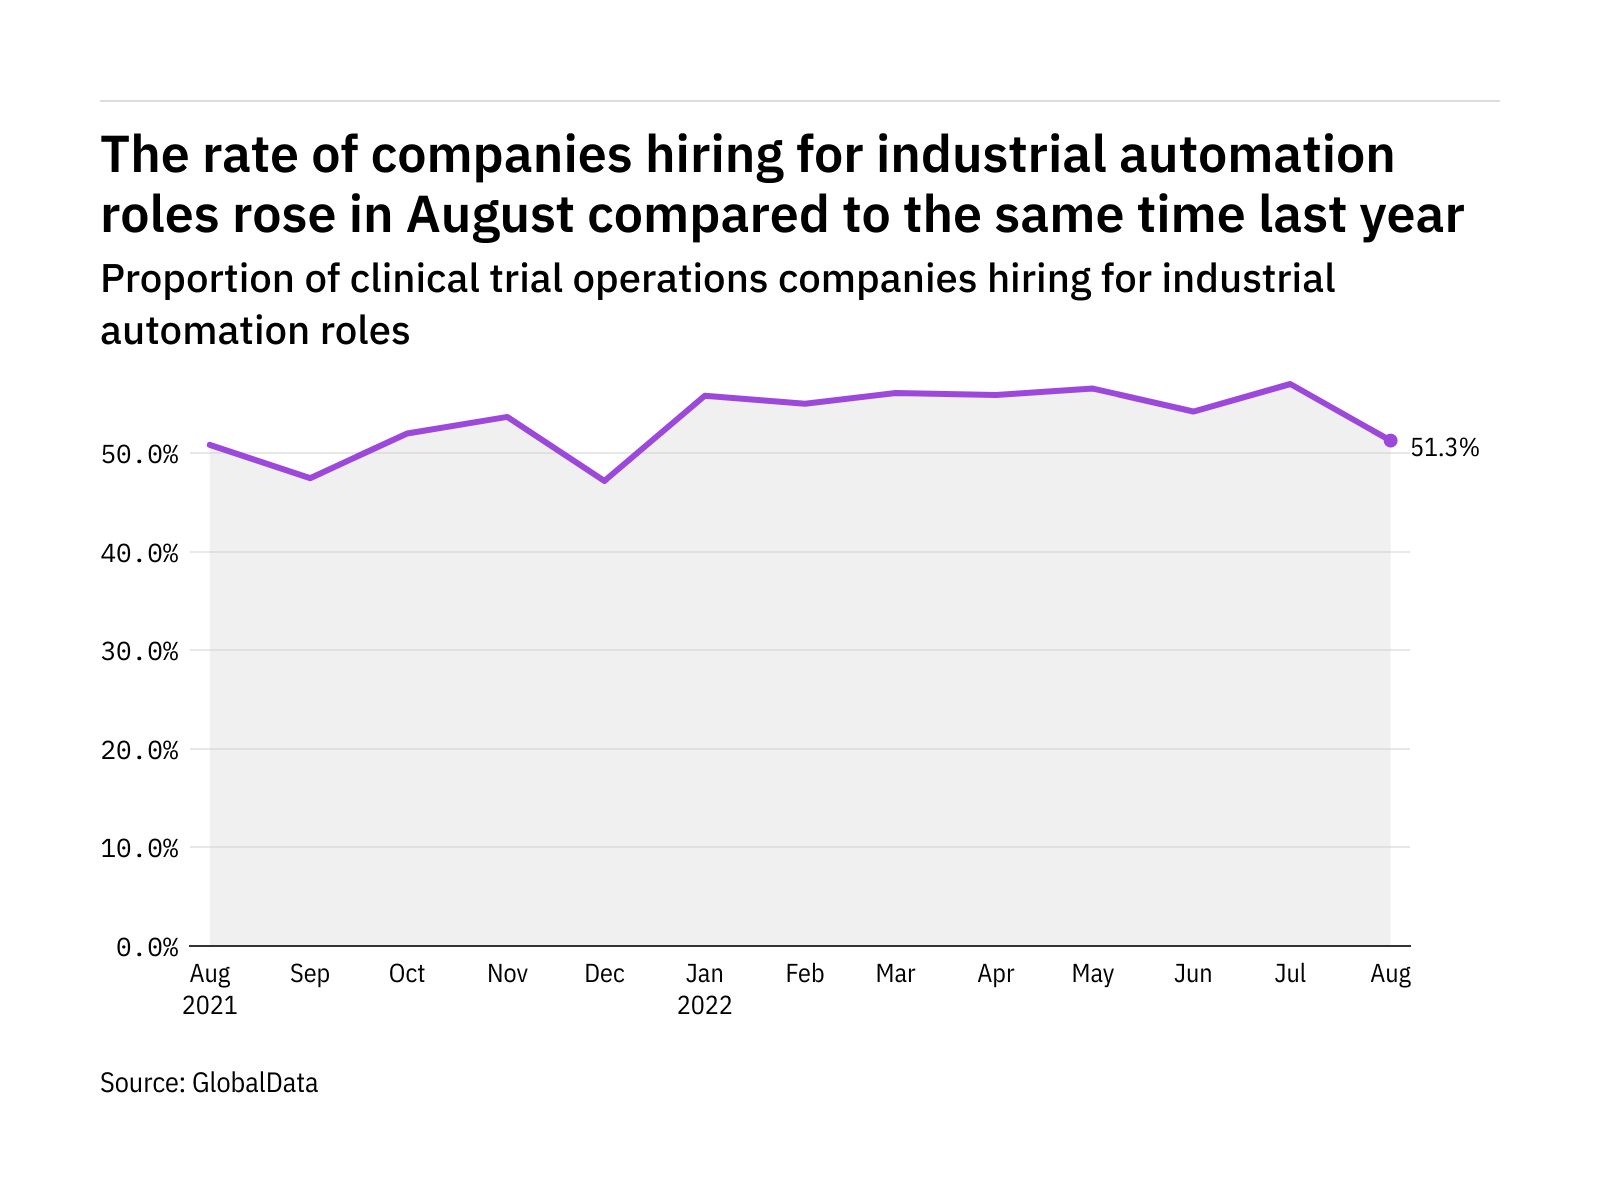 Industrial automation hiring levels in the clinical trial operations industry rose in August 2022